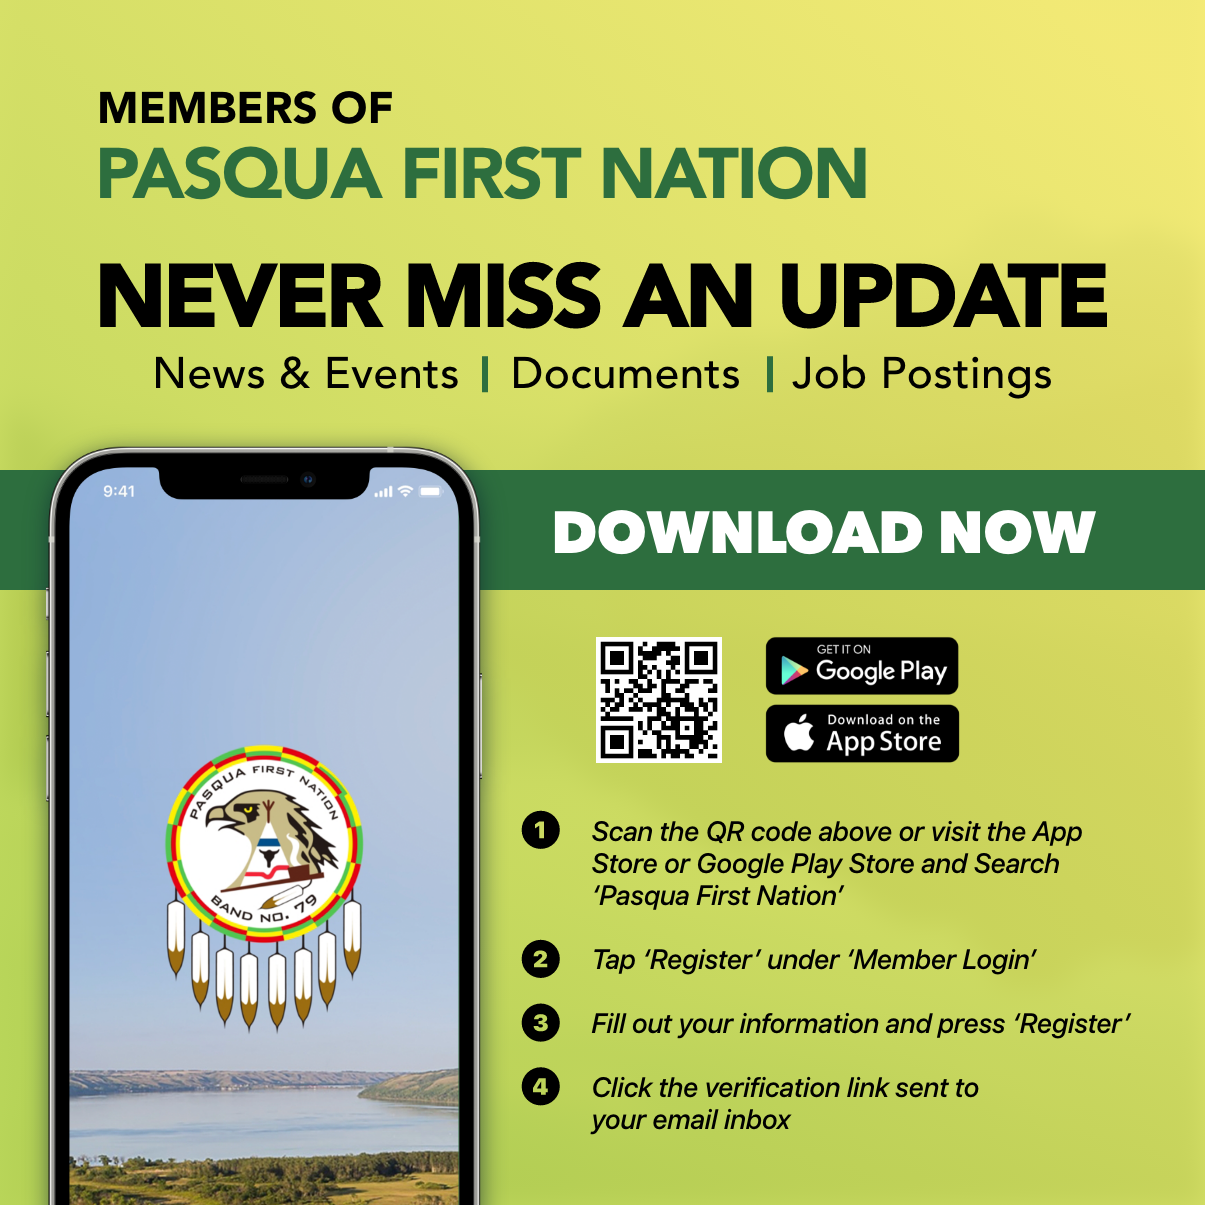 The Pasqua First Nation app displayed on an iphone with scannable QR code to download.